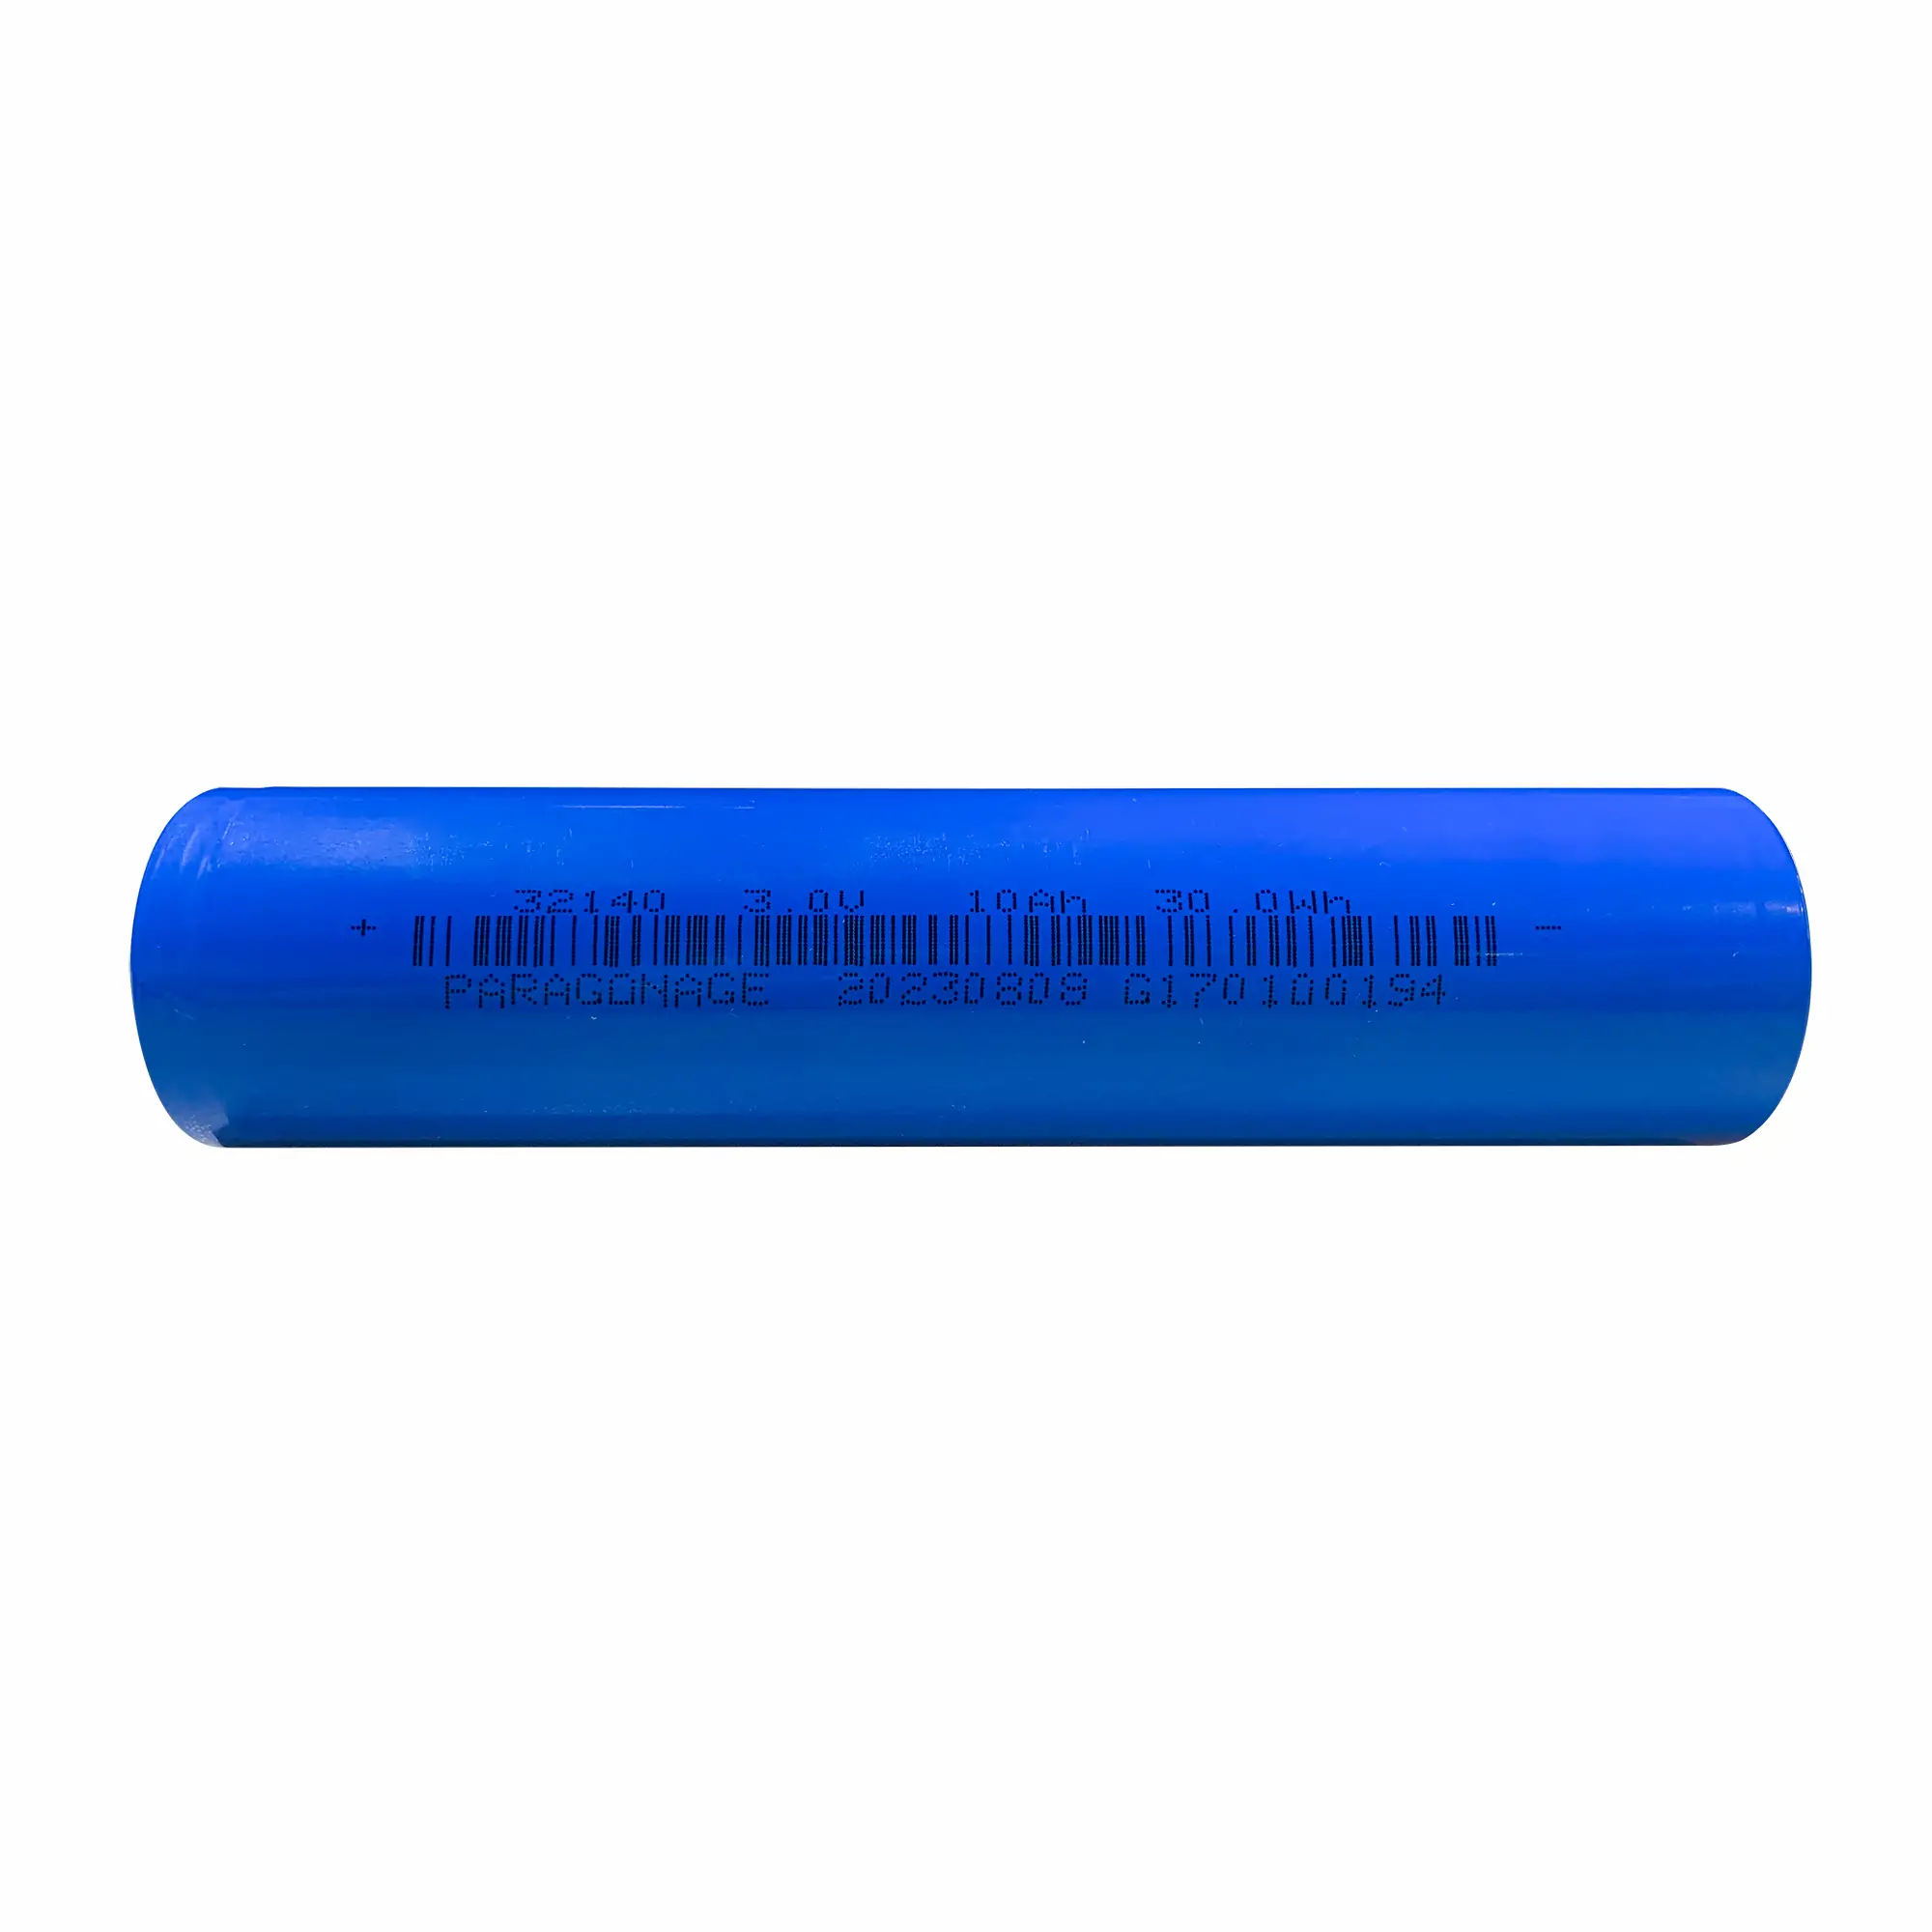 sodium battery cell